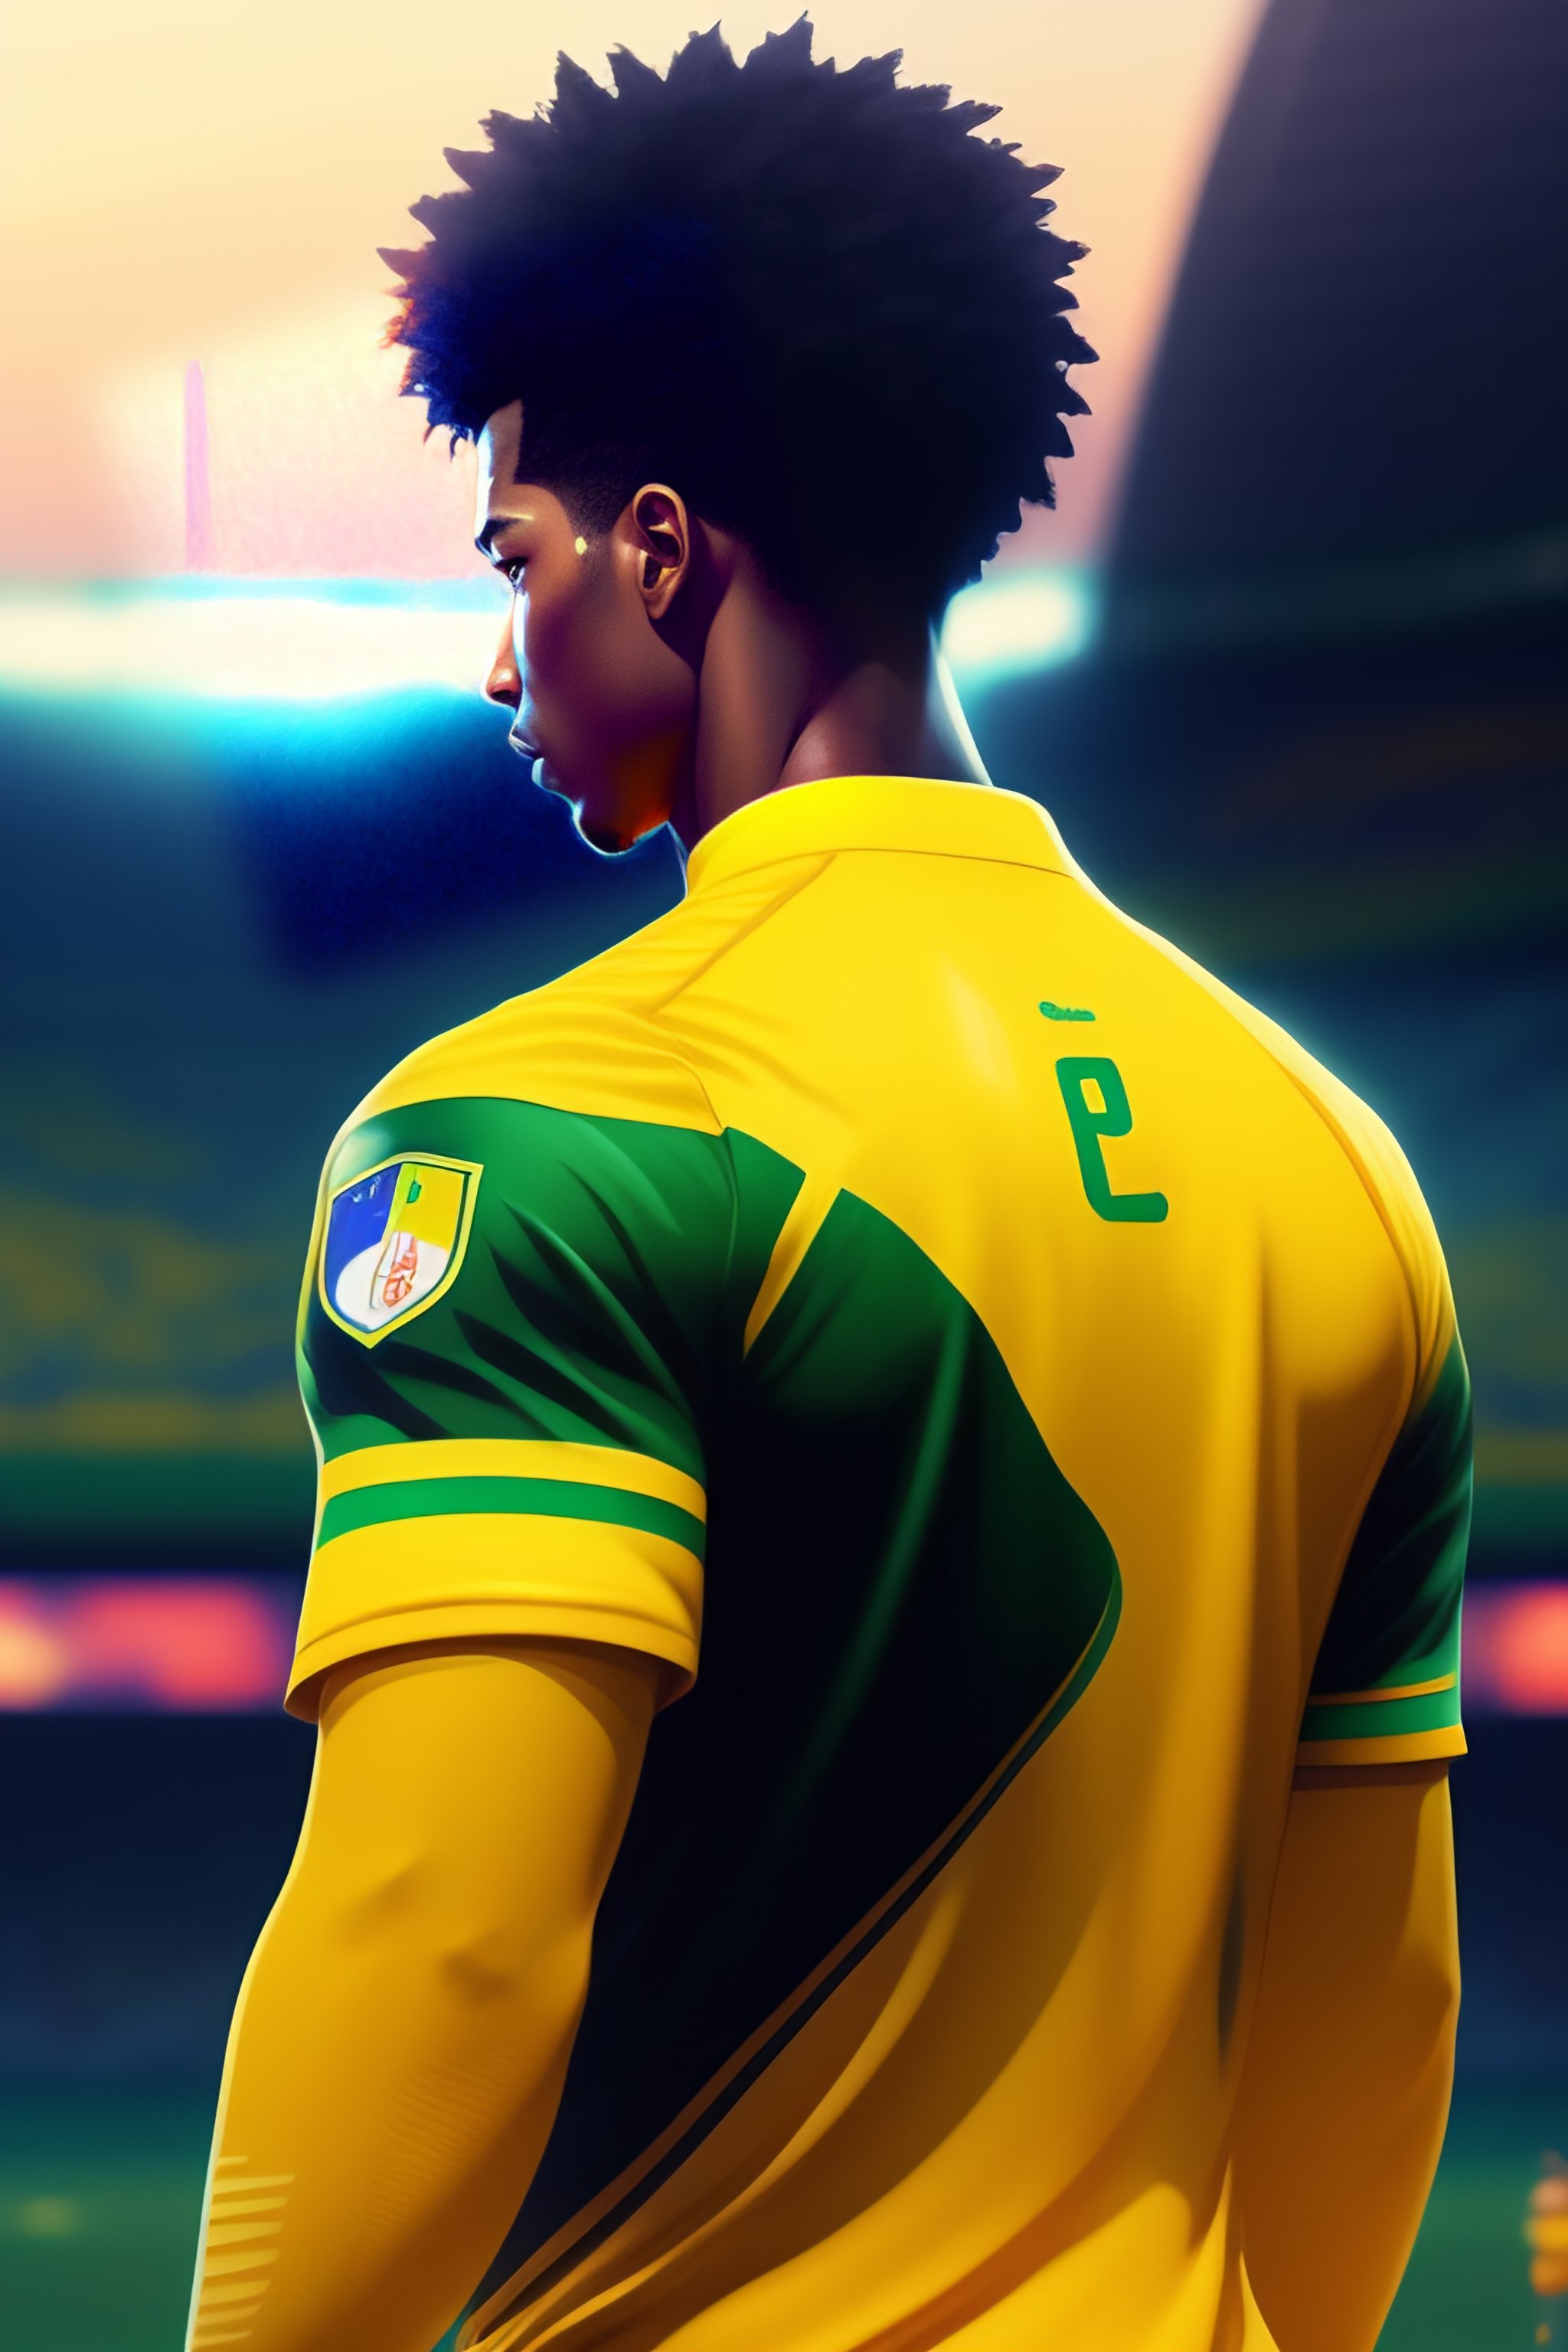 Lexica - Back of a Brazil Footballer wearing 10 yellow brazil team jersey  playing football, backdrop of dawn, saturn in the background,  illustration,